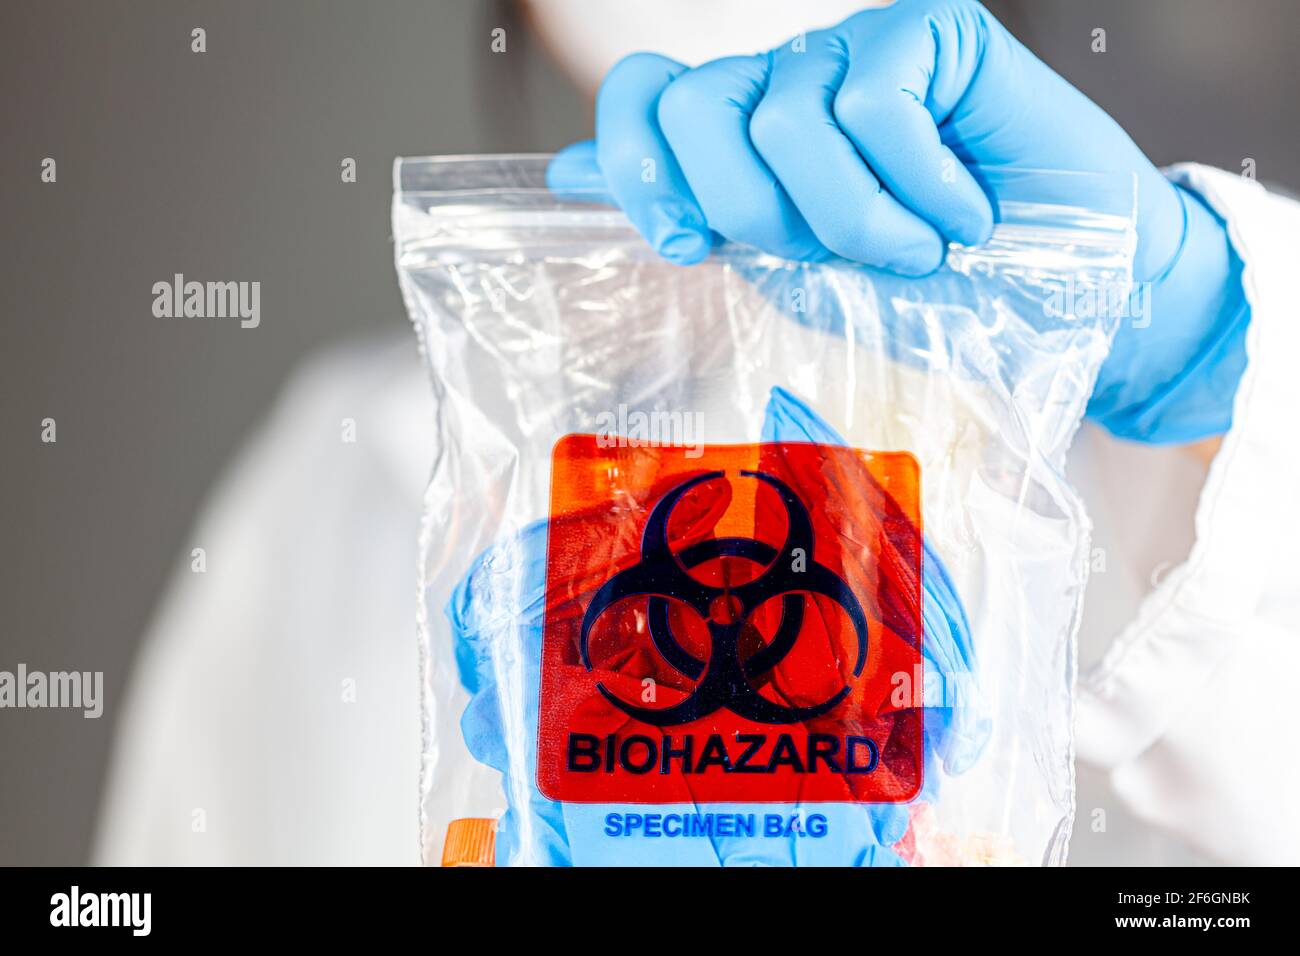 A woman researcher is holding a clear plastic bag with biohazard logo printed on. The bag contains, potentially dangerous biological specimens. Scient Stock Photo